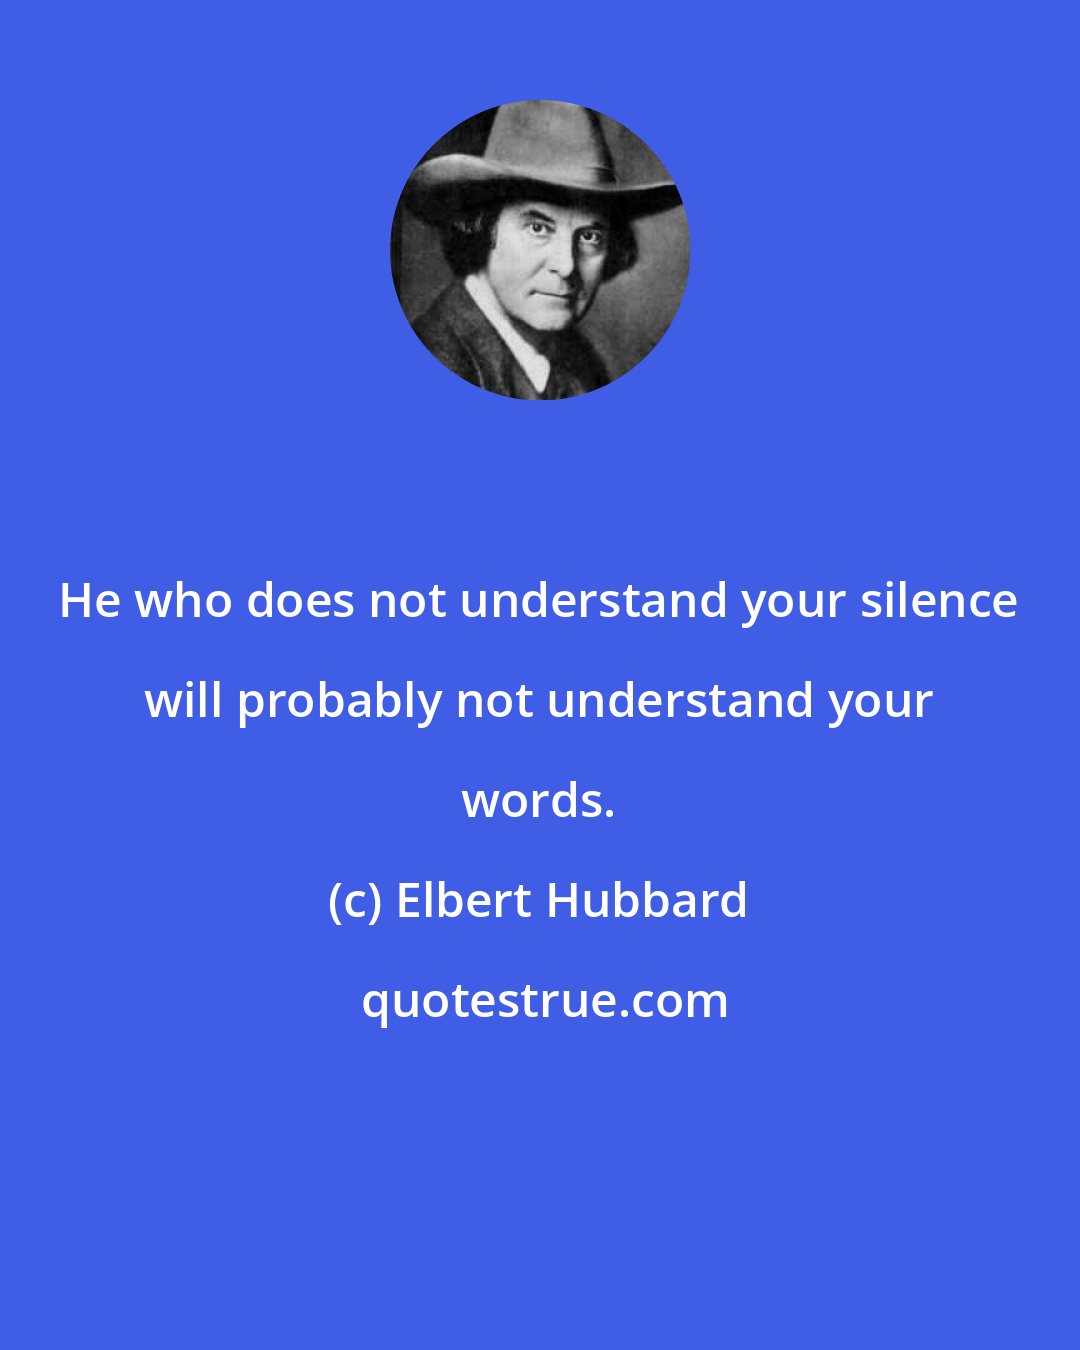 Elbert Hubbard: He who does not understand your silence will probably not understand your words.